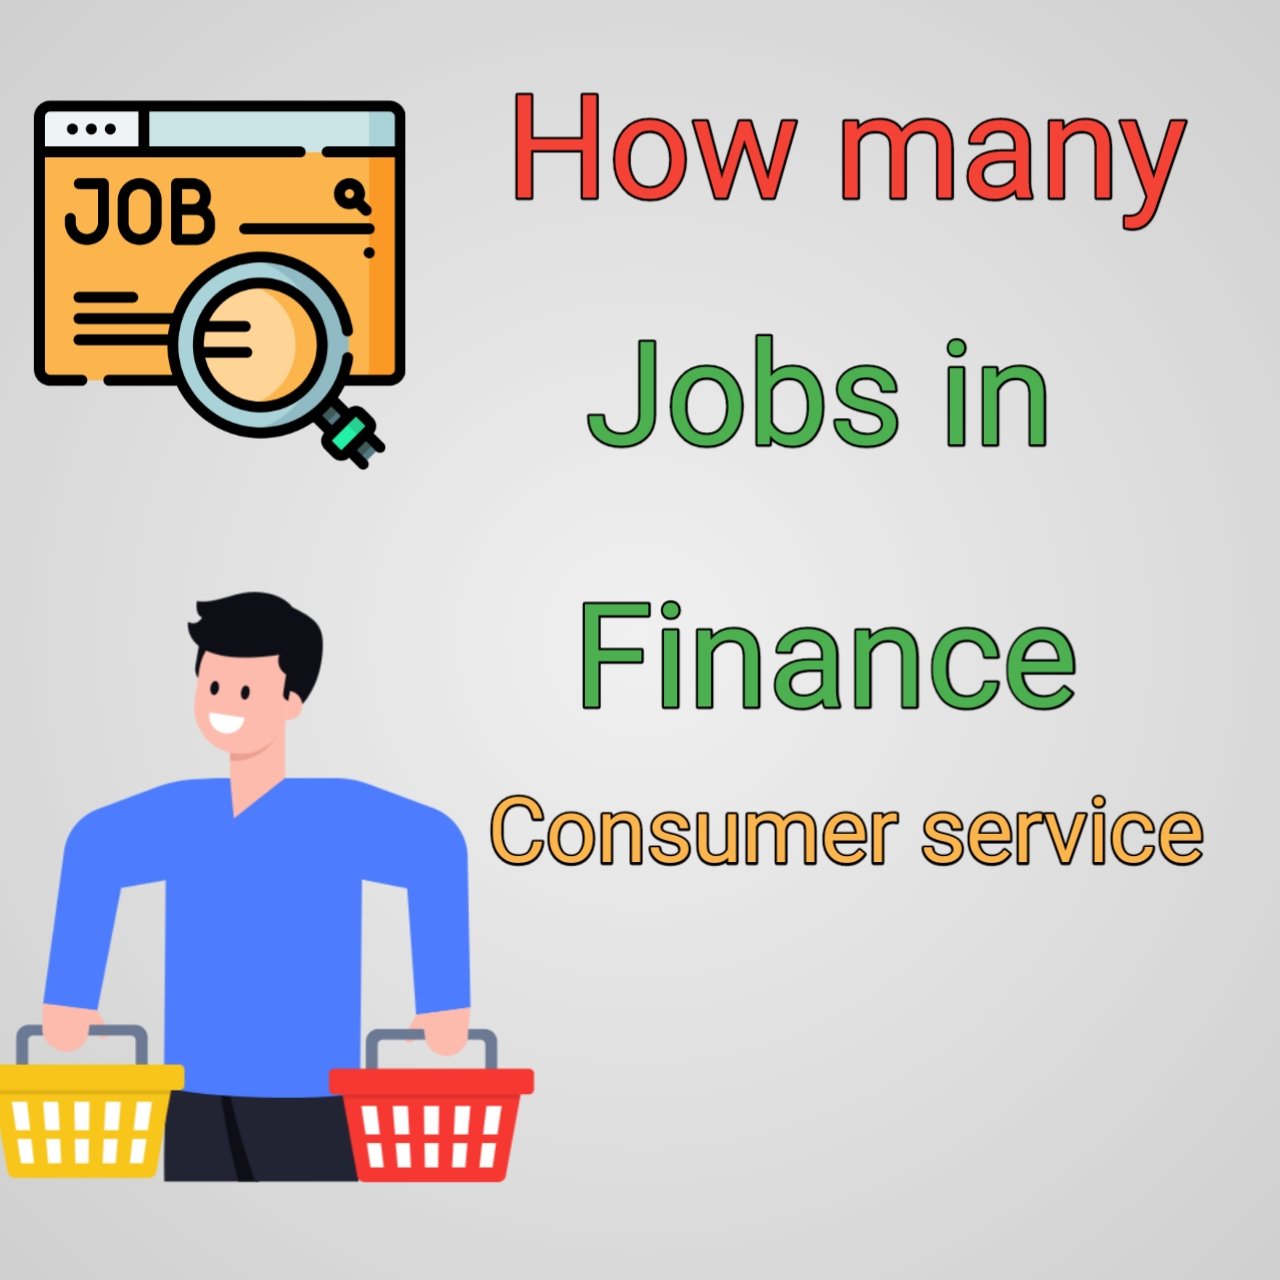 How Many Jobs Are Available In Finance Consumer Services